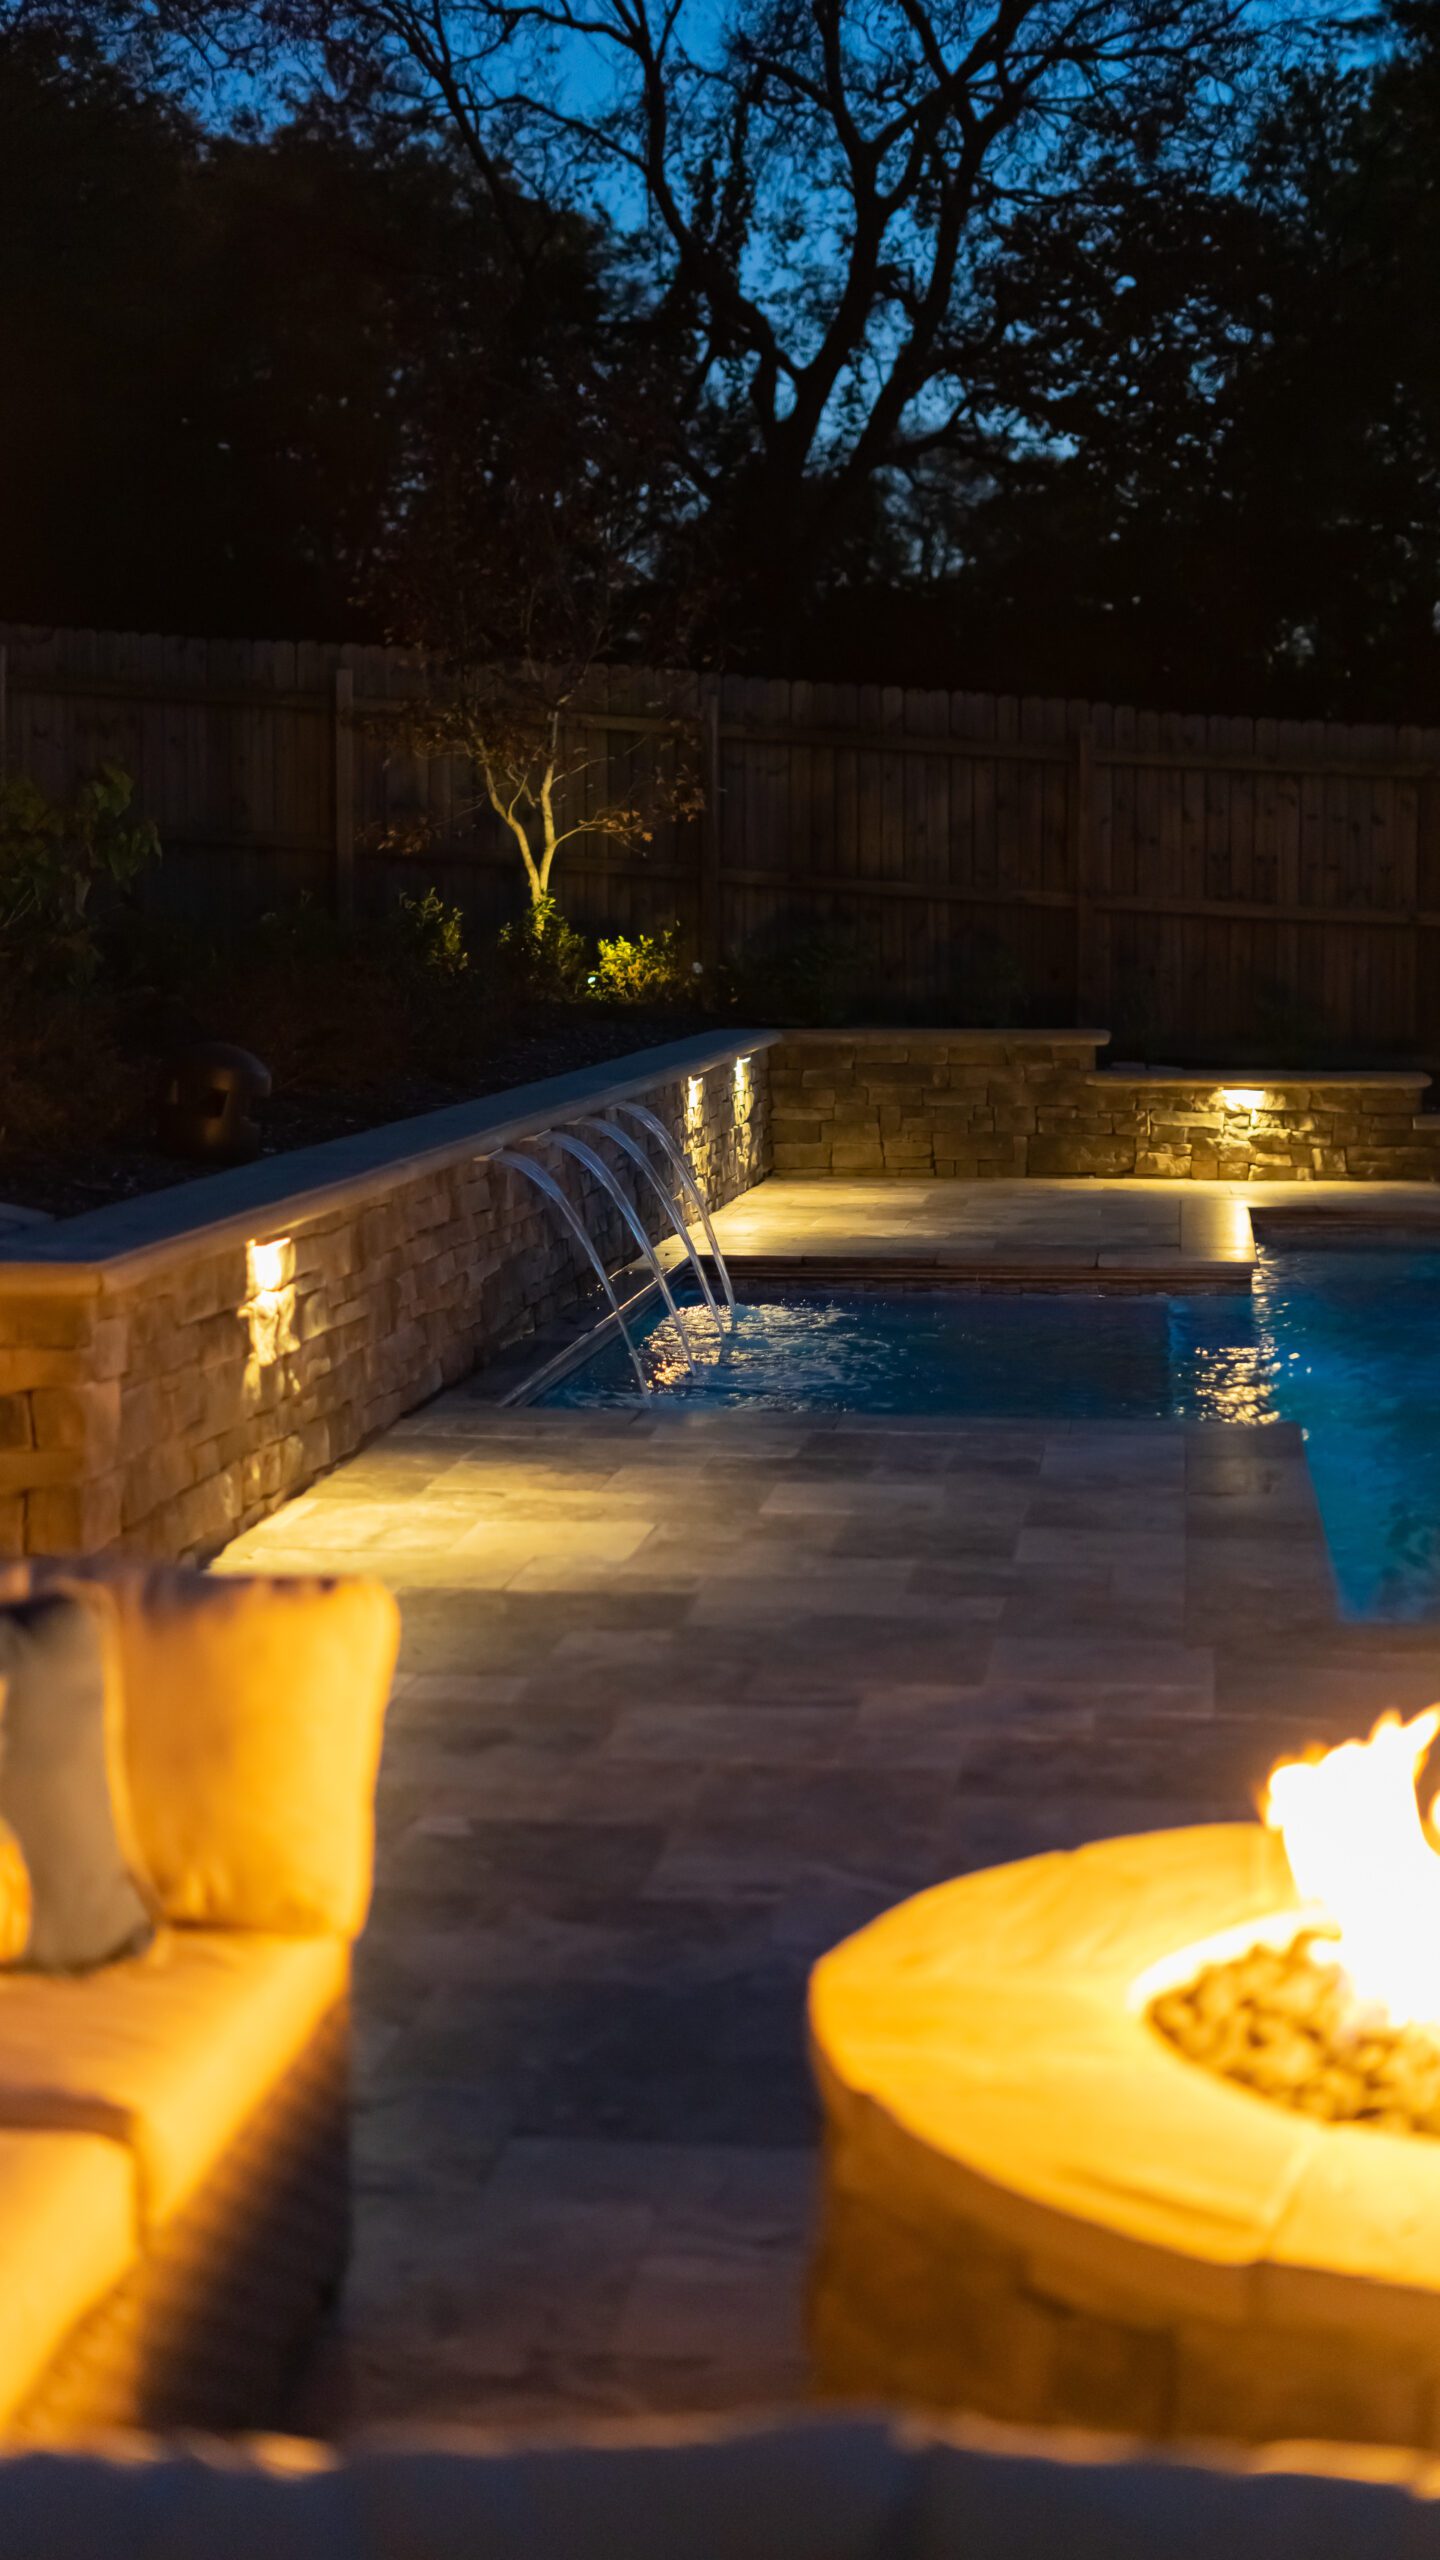 Pool lighting installed by general contractors in Nashville, TN